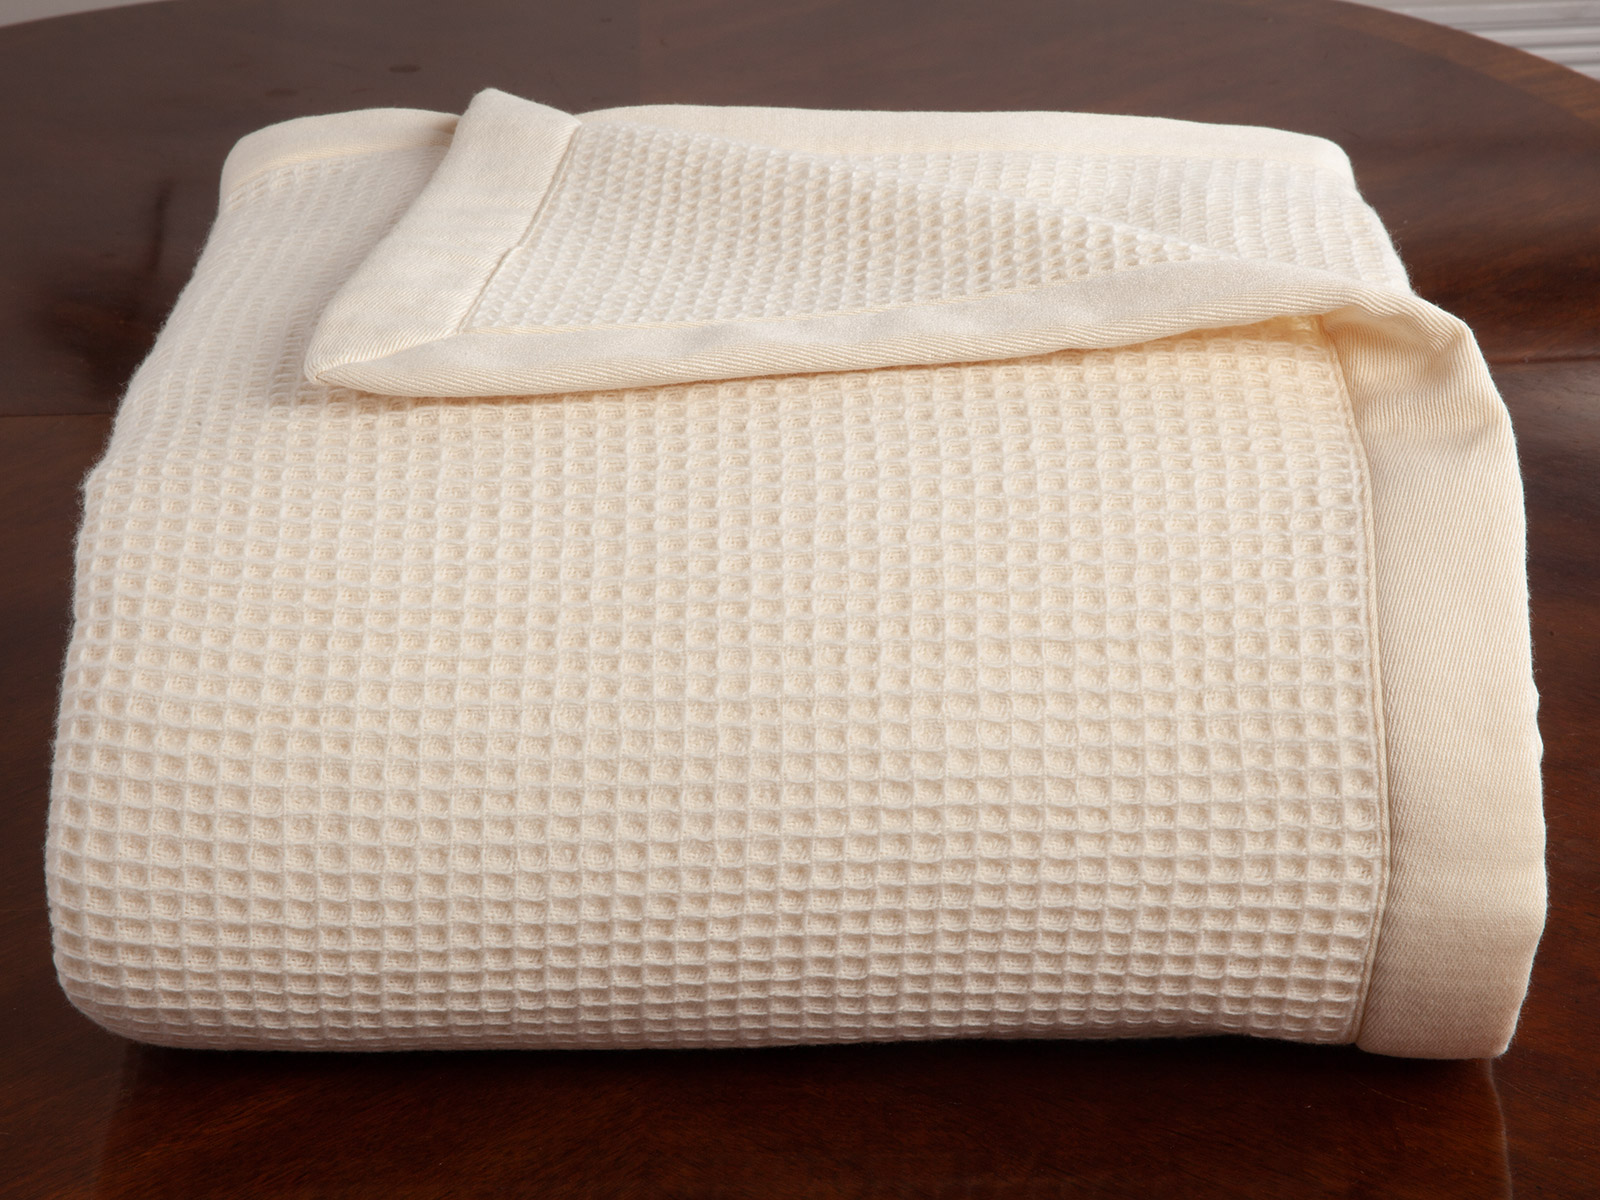 Linhaven Cotton Thermal Blanket: Ivory